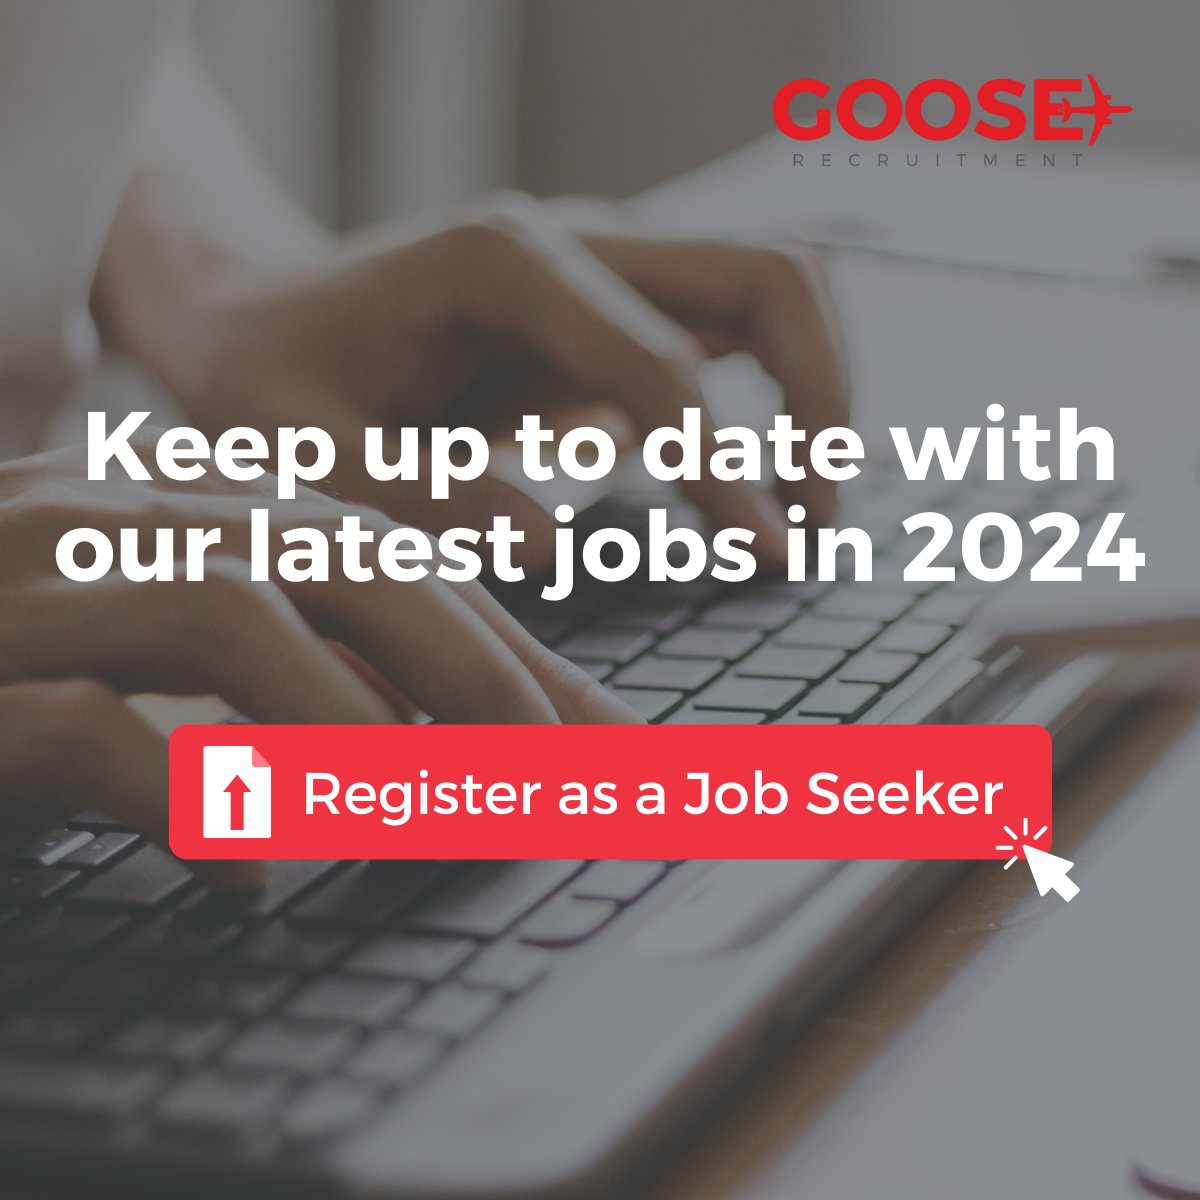 Attention Aviation Professionals, explore career opportunities with GOOSE Recruitment in 2024. No perfect match? Register as a job seeker for updates.

goose-recruitment.com/users/register…

#AviationProfessionals #JobSearch2024 #AviationJobs